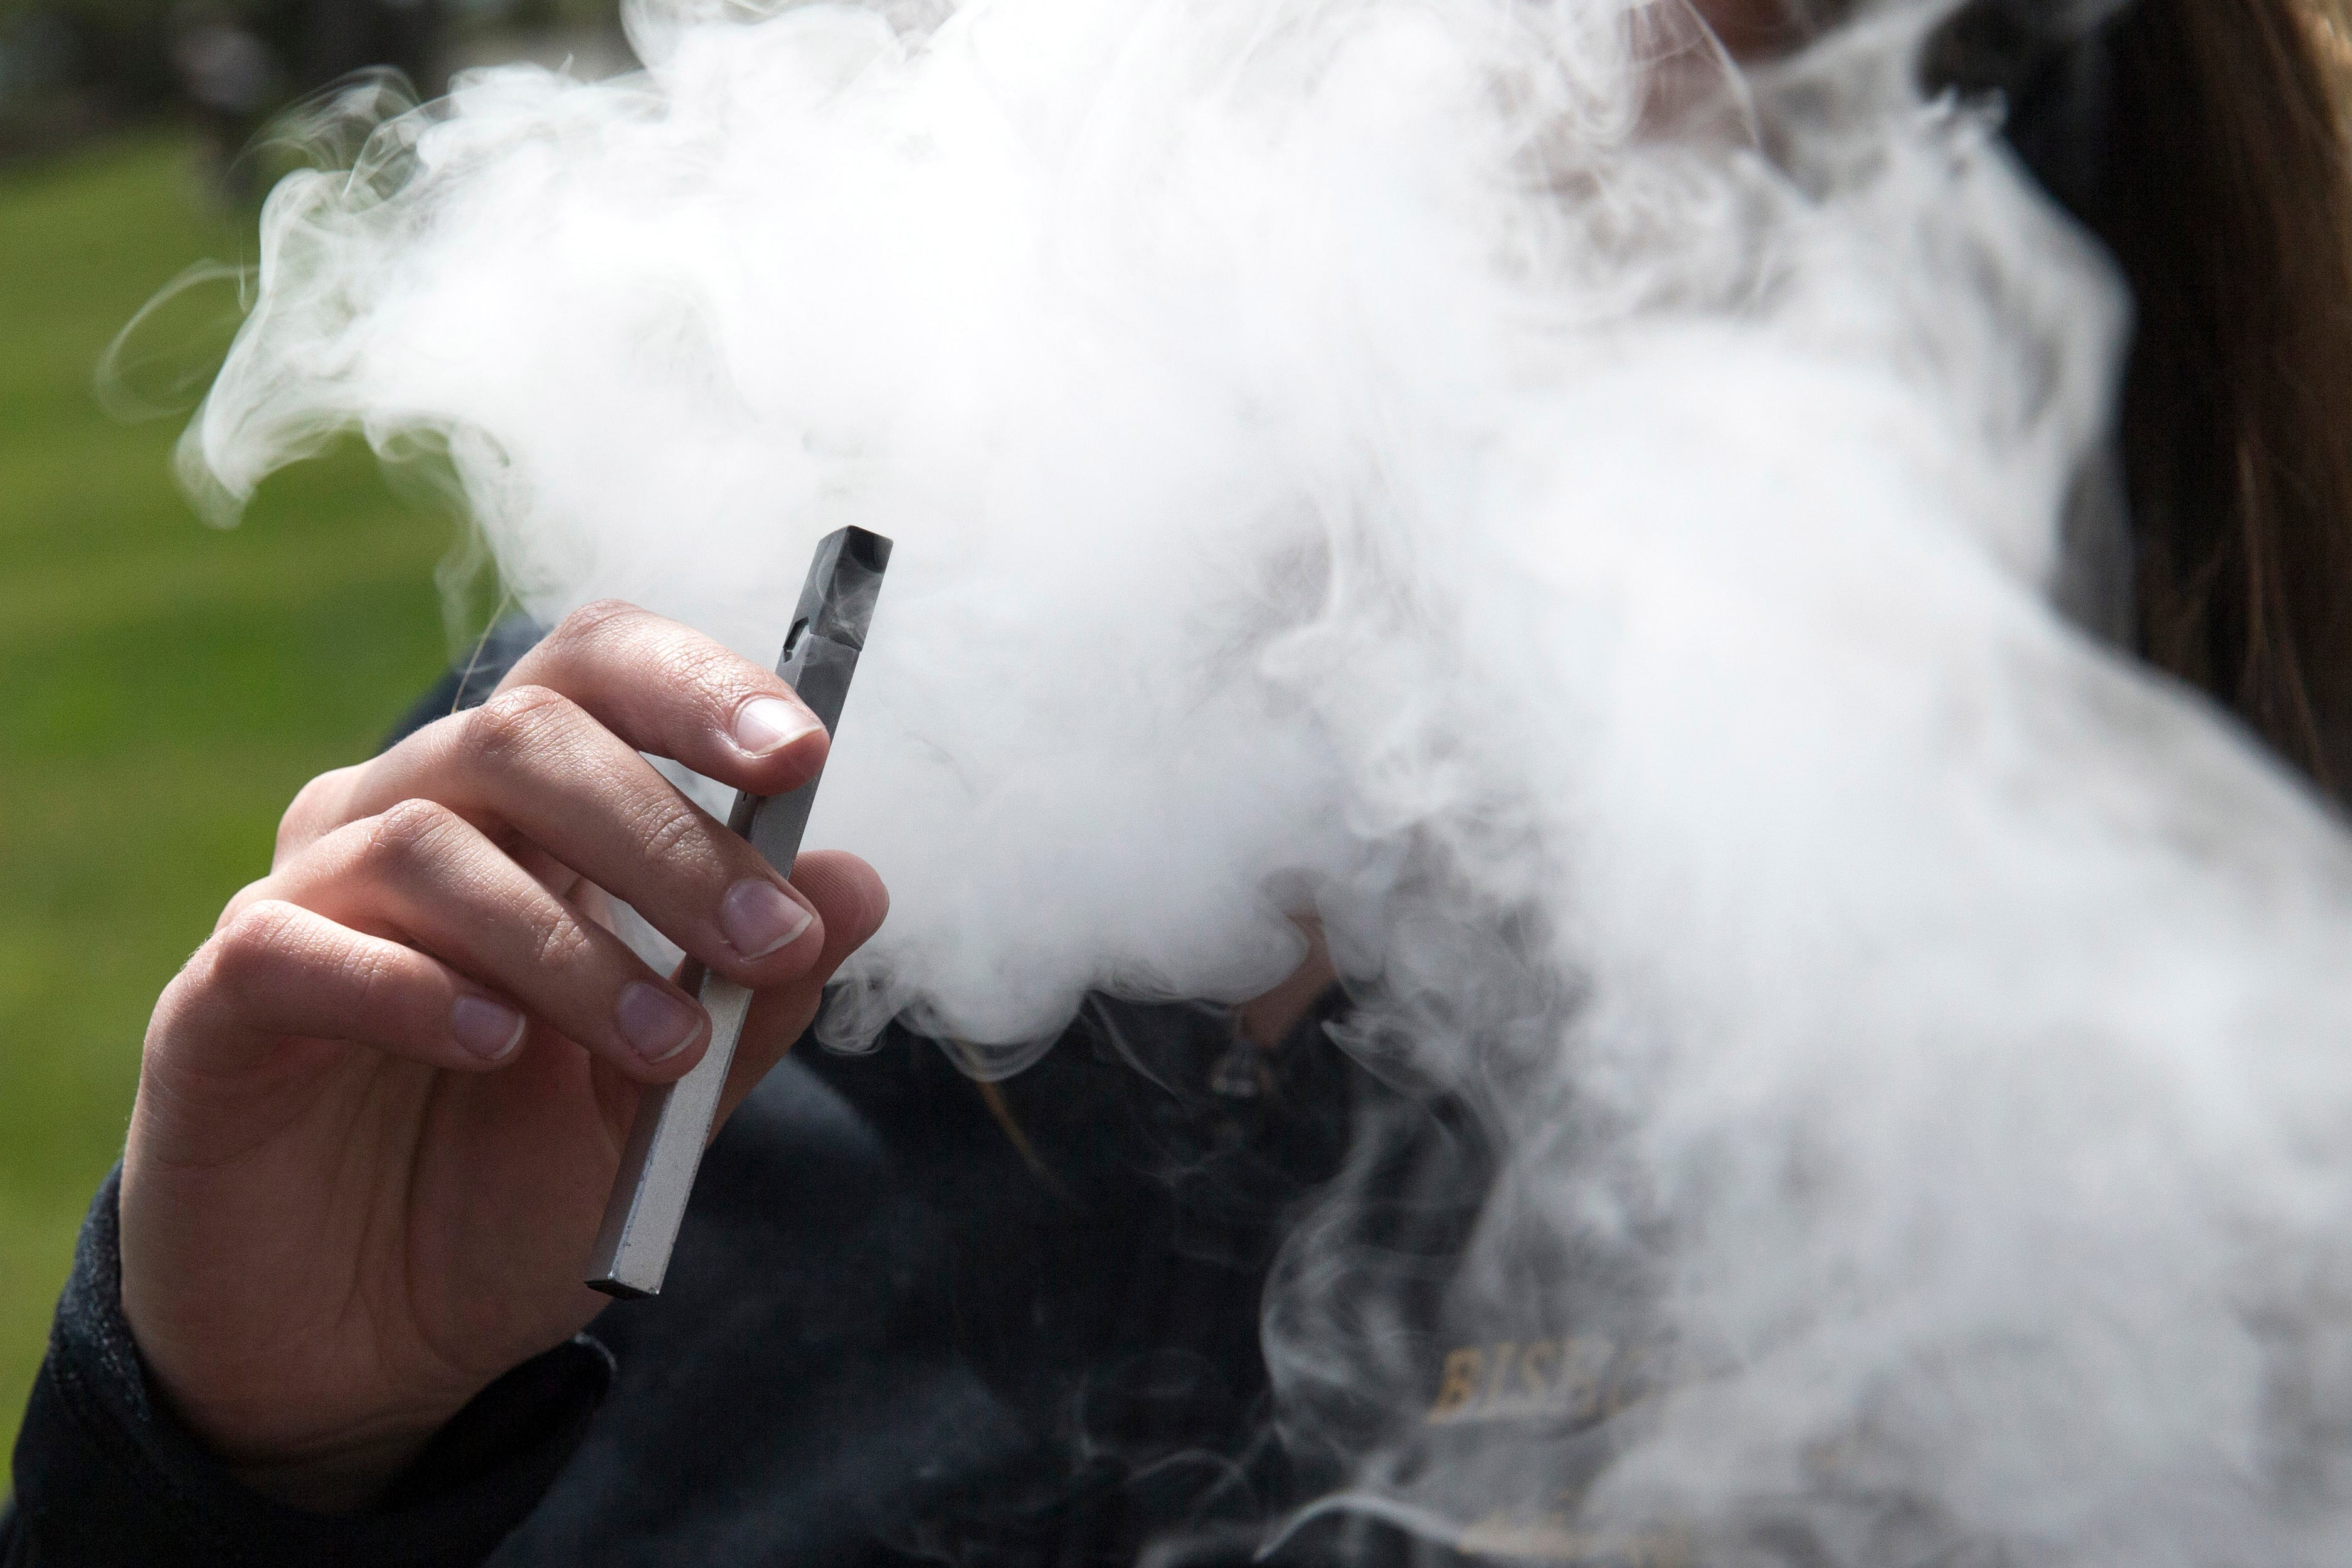 A teen holds an e-cigarette while a cloud of vape smoke covers their face outside.